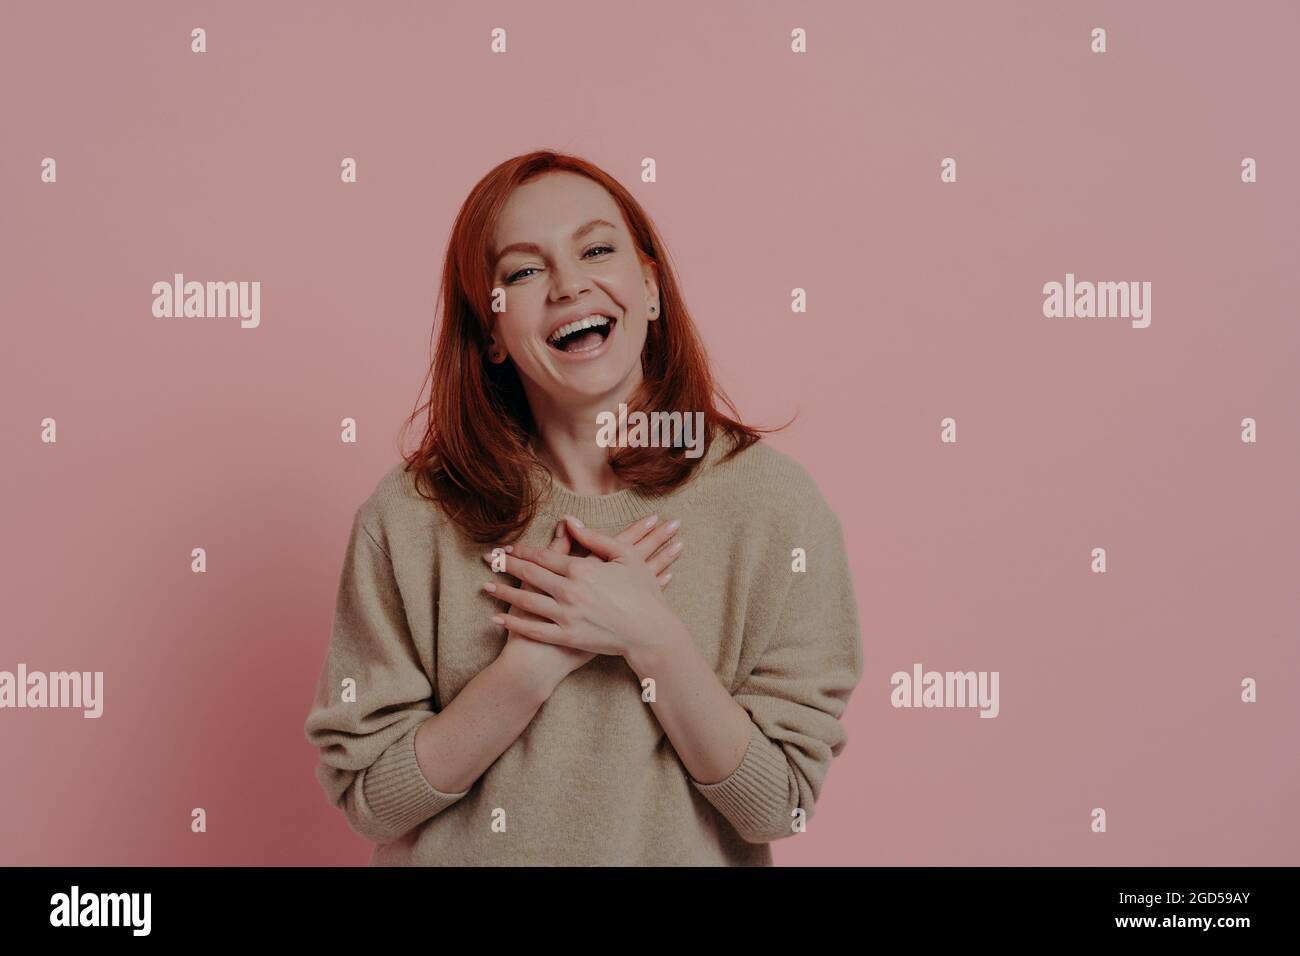 Delighted red-haired funny woman laughing out loud isolated on pink background Stock Photo